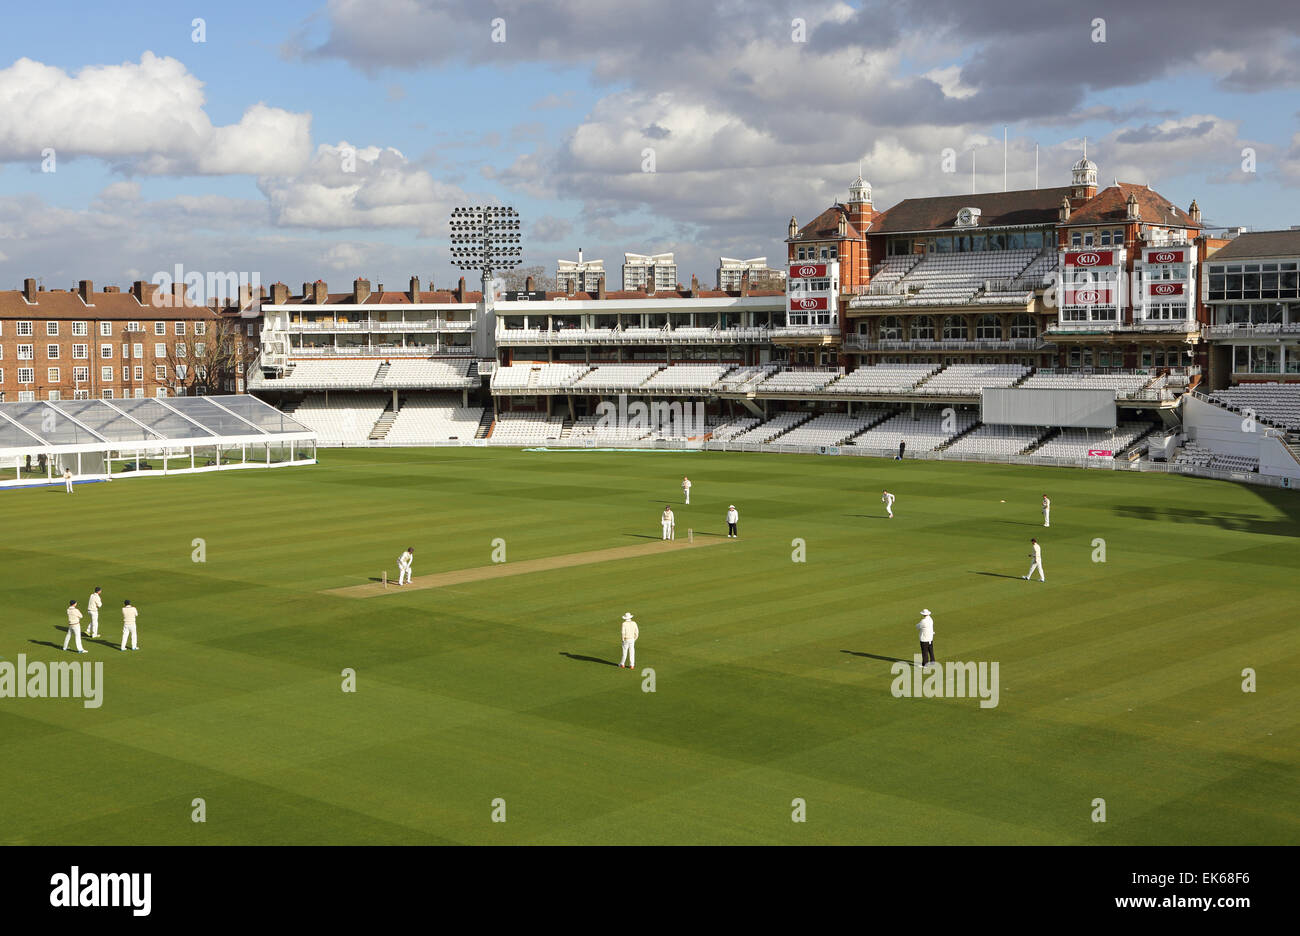 Players from Surrey County Cricket Club practice at the empty Oval Cricket Ground in south London, UK Stock Photo